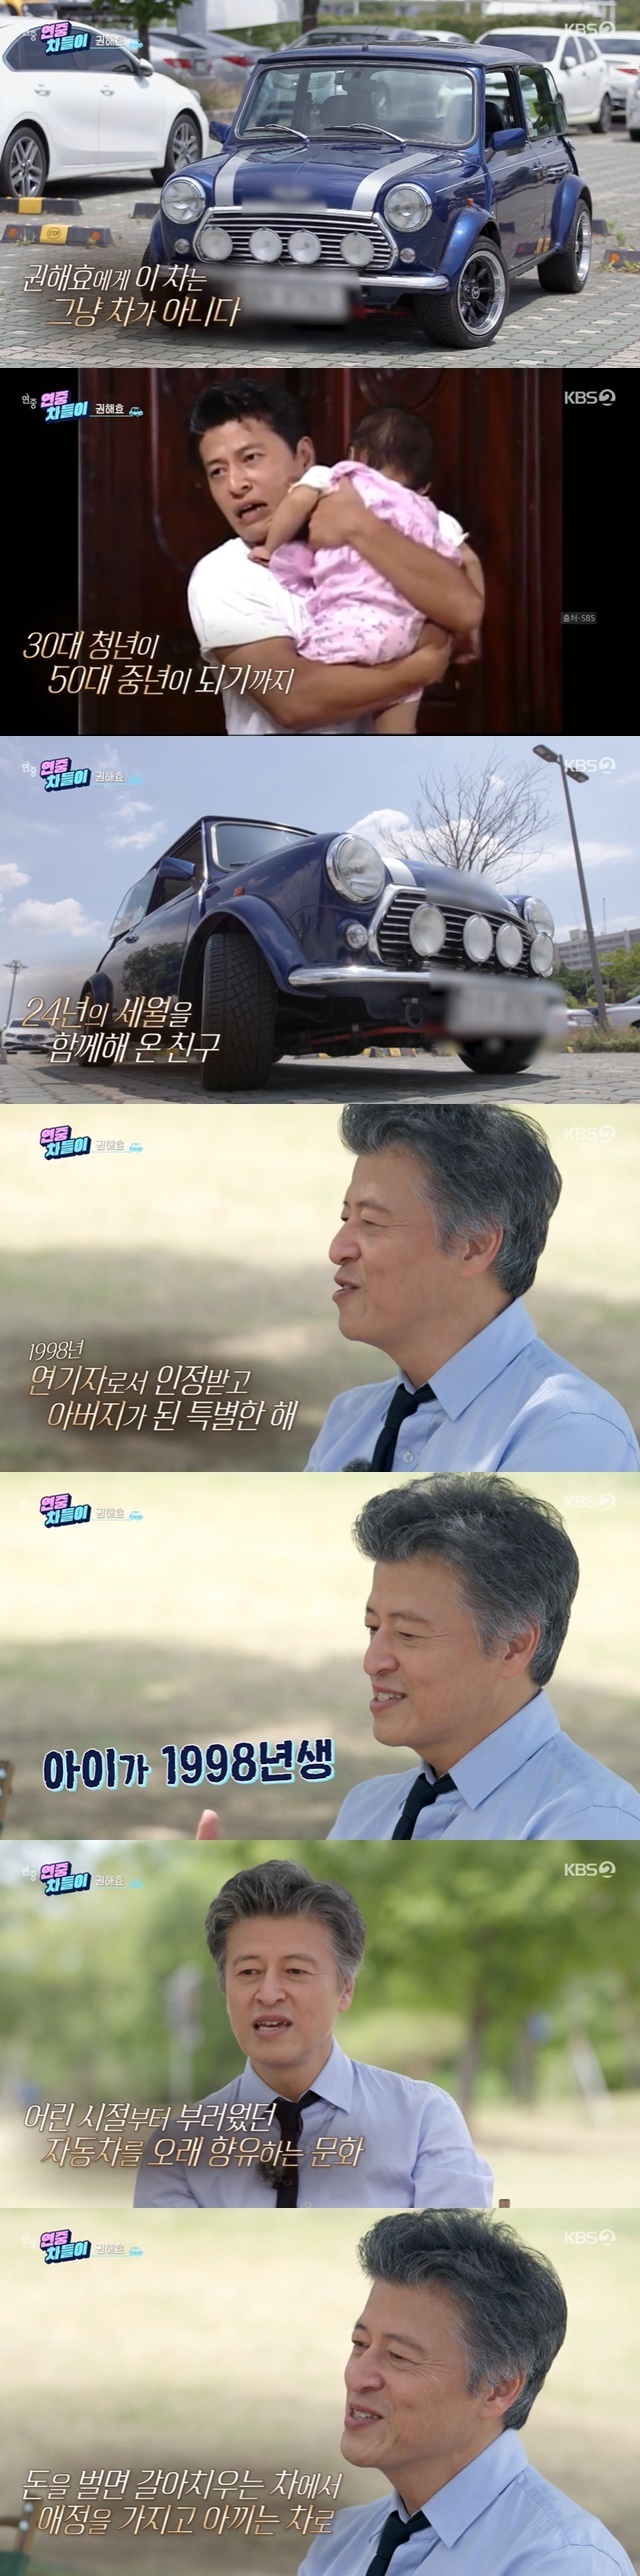 Kwon Hae-Hyo cited her affection for her child and car as the reason for her insistence on a 98 car.Actor Kwon Hae-Hyo released the old car on KBS 2TV Year-round live broadcast on June 16th.On the same day, Entertainment Weekly Cars released a vehicle owned by actor Kwon Hae-Hyo since 1999.Kwon Hae-Hyo was well-managed and said, It was produced in 59 and sold more than 5 million former Worlds in 41 years.Its the easiest car to get parts from all Worlds, as far as I know.Kwon Hae-Hyo then had a time to look back on 30 years of acting life.Kwon Hae-Hyo said about his debut in 1992 with the movie Signor Akiko Sonja that Lee Jang-ho came to see me at the school and said, You are attractive.When he bought the car in 1999, he appeared in Drama Silence, sitcom Three Men and Three Women, and Drama Mr. Q.It was just a while after the birth of the child, said Kwon Hae-Hyo, because the child was born in 1998, and I wanted to see him ride the same car with his birthday.It was an envious culture, he said.Kwon Hae-Hyo then commented on the movie After that starred with his real wife Cho Yoon-hee, In 30 years, there have been almost 60 movies and nearly 60 dramas.I think it was also special for my wife and Khan to be invited to compete with each other, even though they were attached to it, he recalled.In the movie Omaju, he was with Lee Jung Eun, an alumni of Hanyang Universitys Department of Theater and Film.Kwon Hae-Hyo said, I first saw Lee Jung Eun when I went to the army in 1989 and saw the play of juniors at school.Lee Jung Eun has been a good person since the moment he entered college at 20 years old. I dont see a few scenes in the movie.I think the whole work is fun rather than the importance or interest of my role, but I see this first.Kwon Hae-Hyo, who is the most wanted role, said, You know, people do not change much after 3 of them.